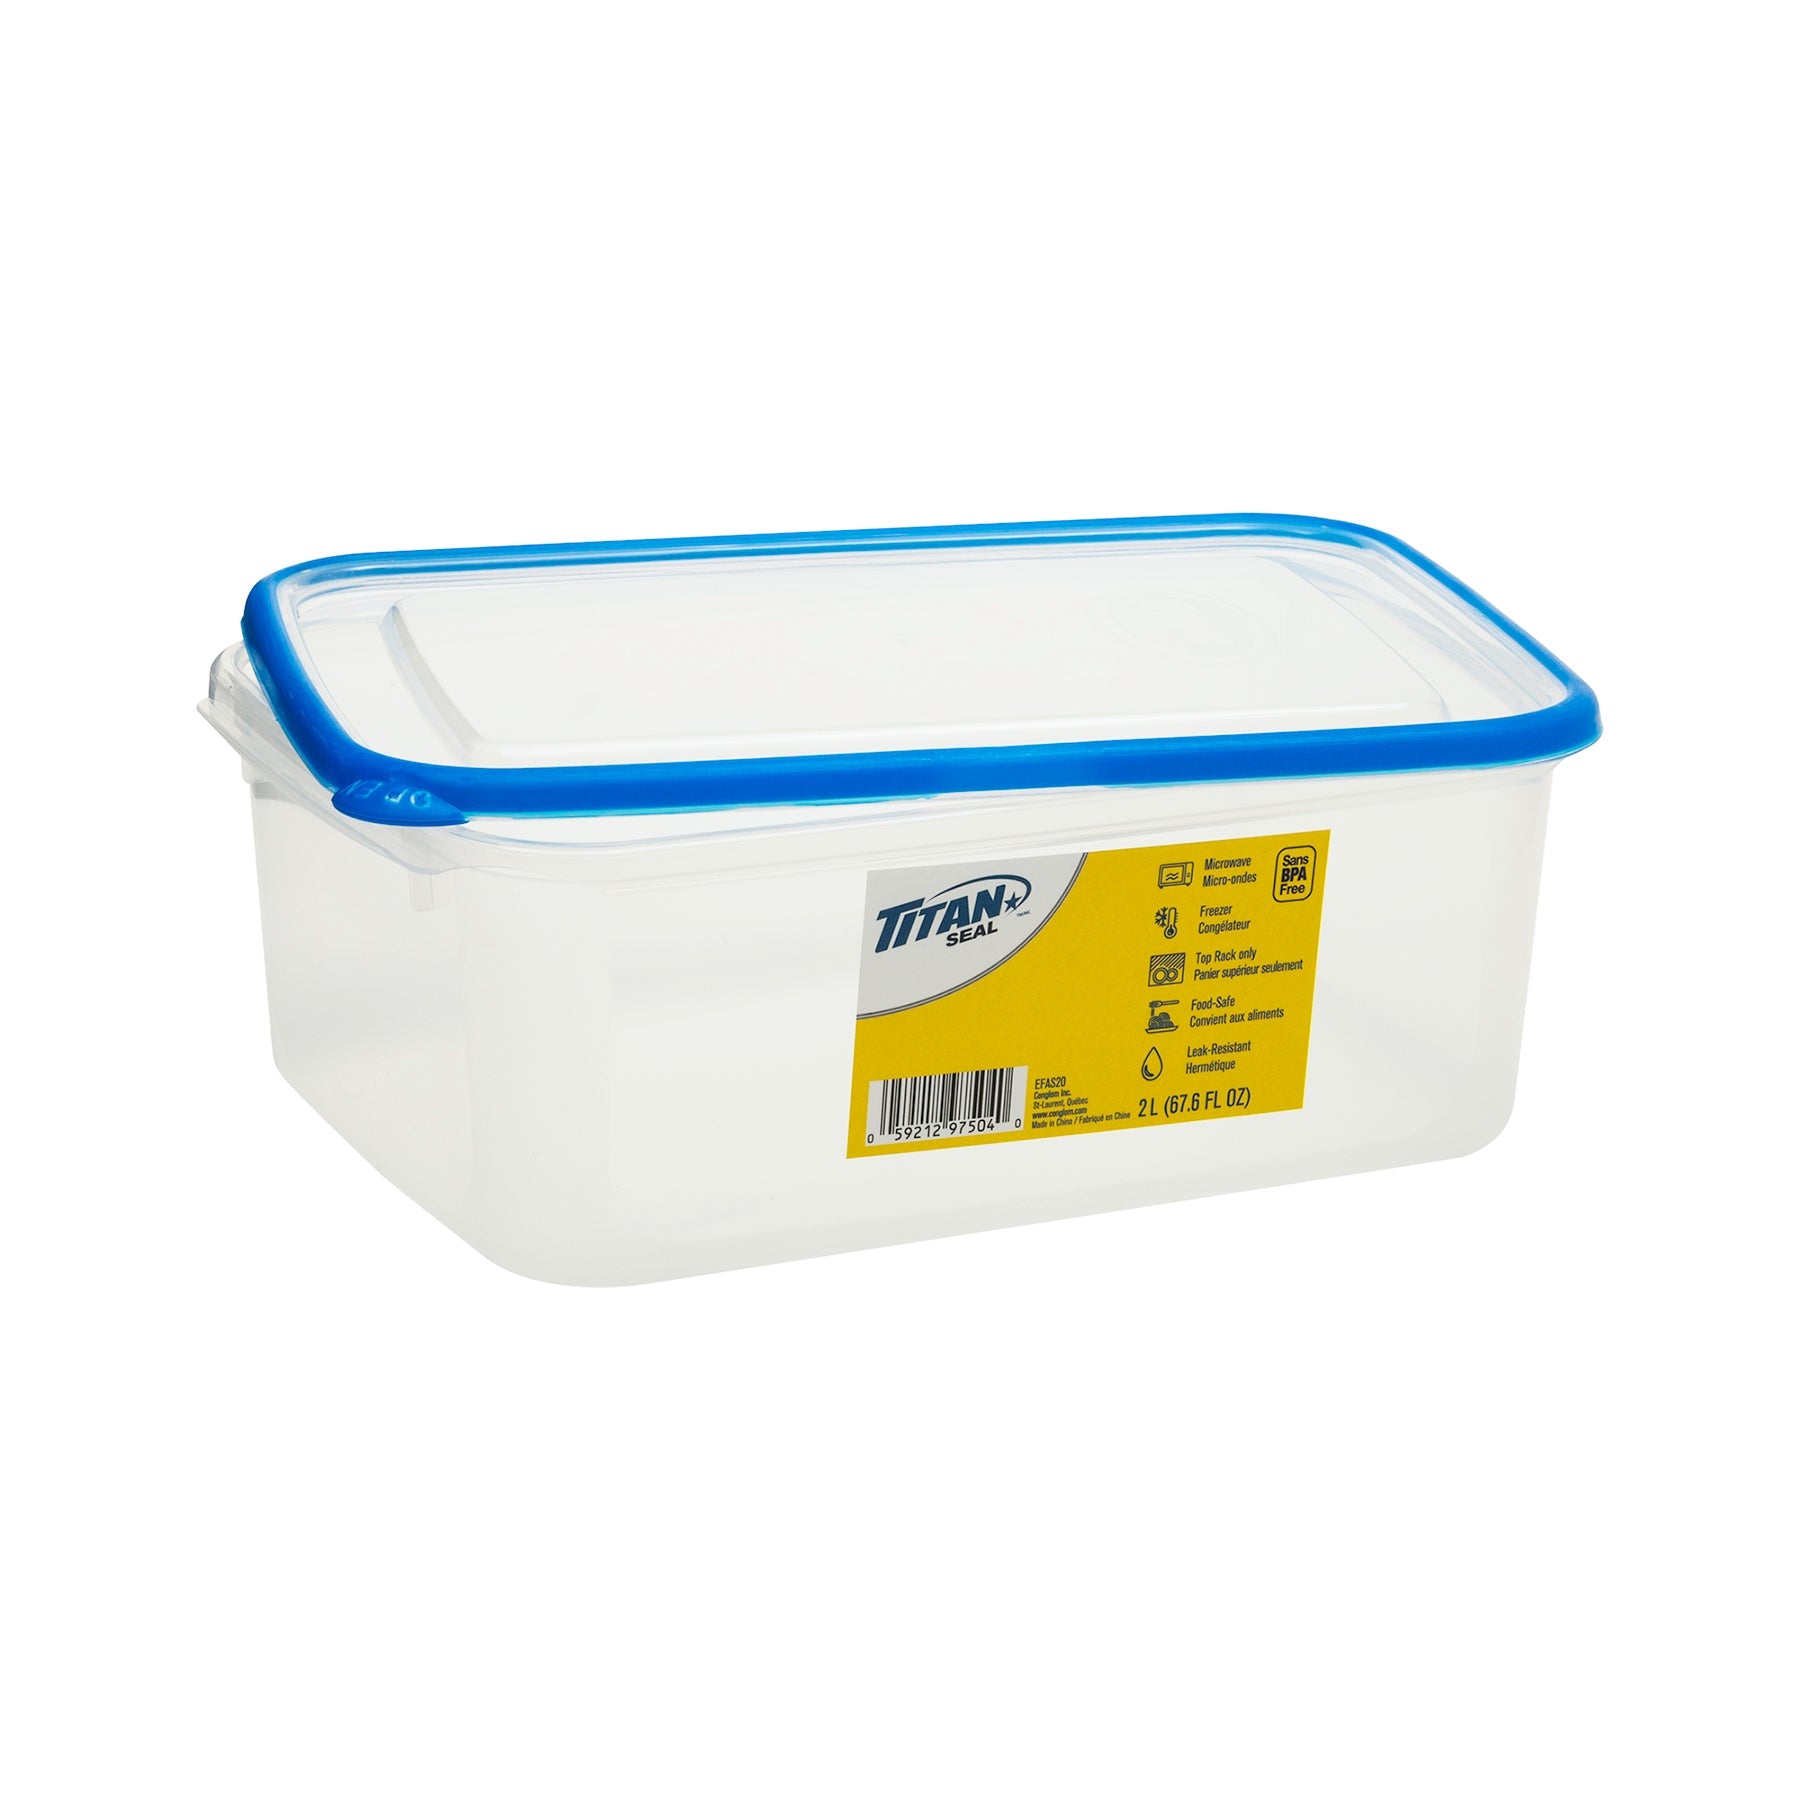 Titan Seal Plastic Food Container with Lid 67.6oz  8x5.5x3.4in